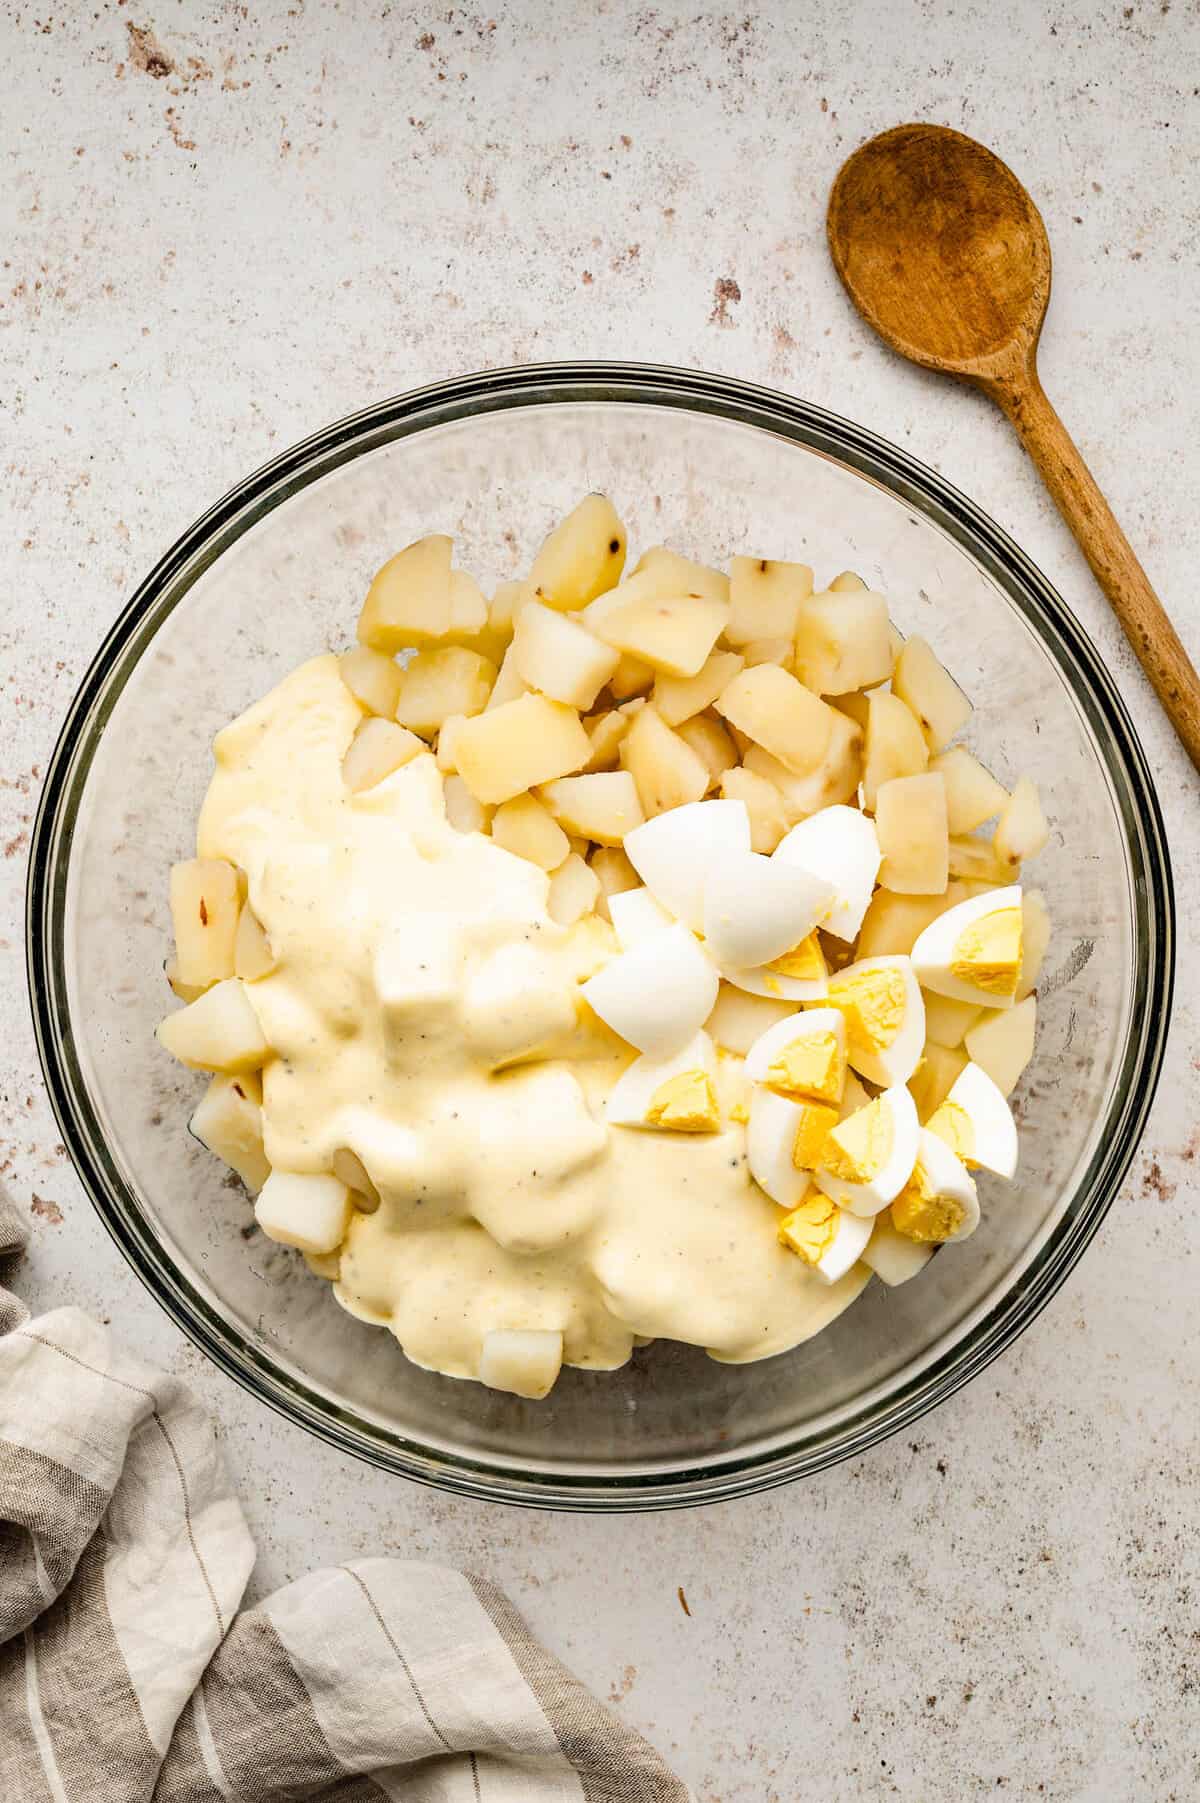 Adding diced hard boiled eggs to potato and dressing mixture for easy homemade potato salad